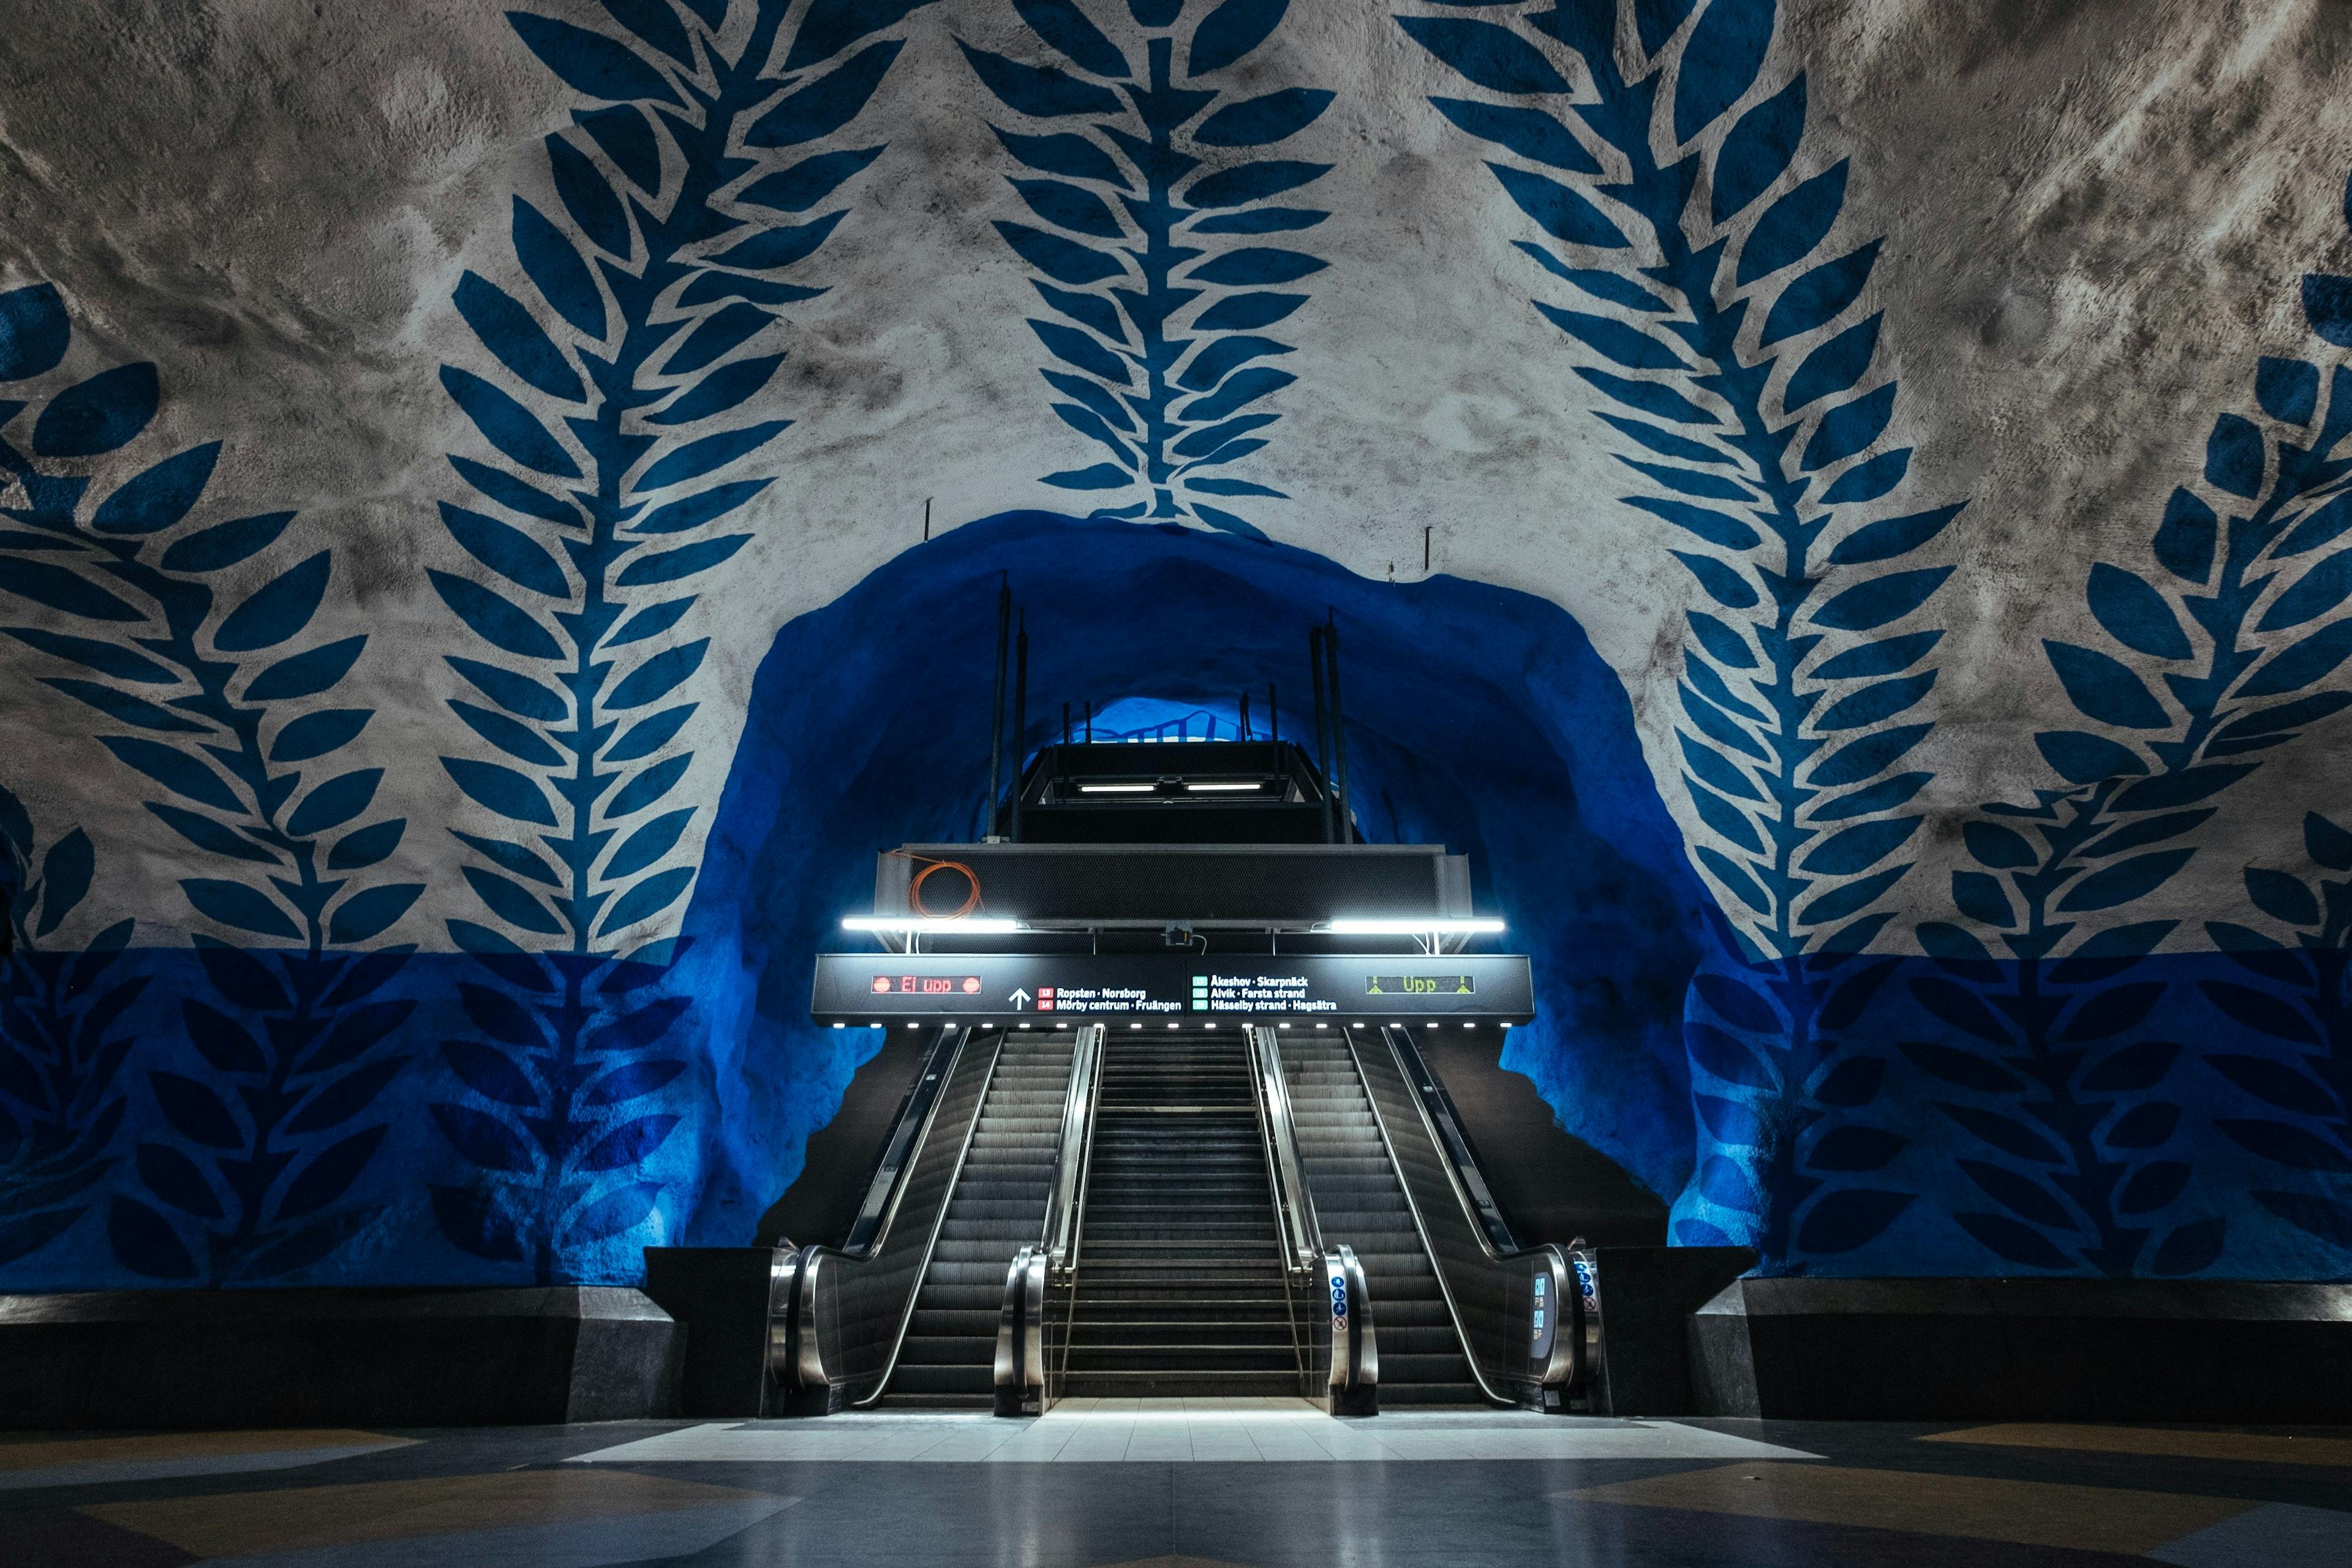 Metro in stockholm, fun facts about Sweden, Ratepunk